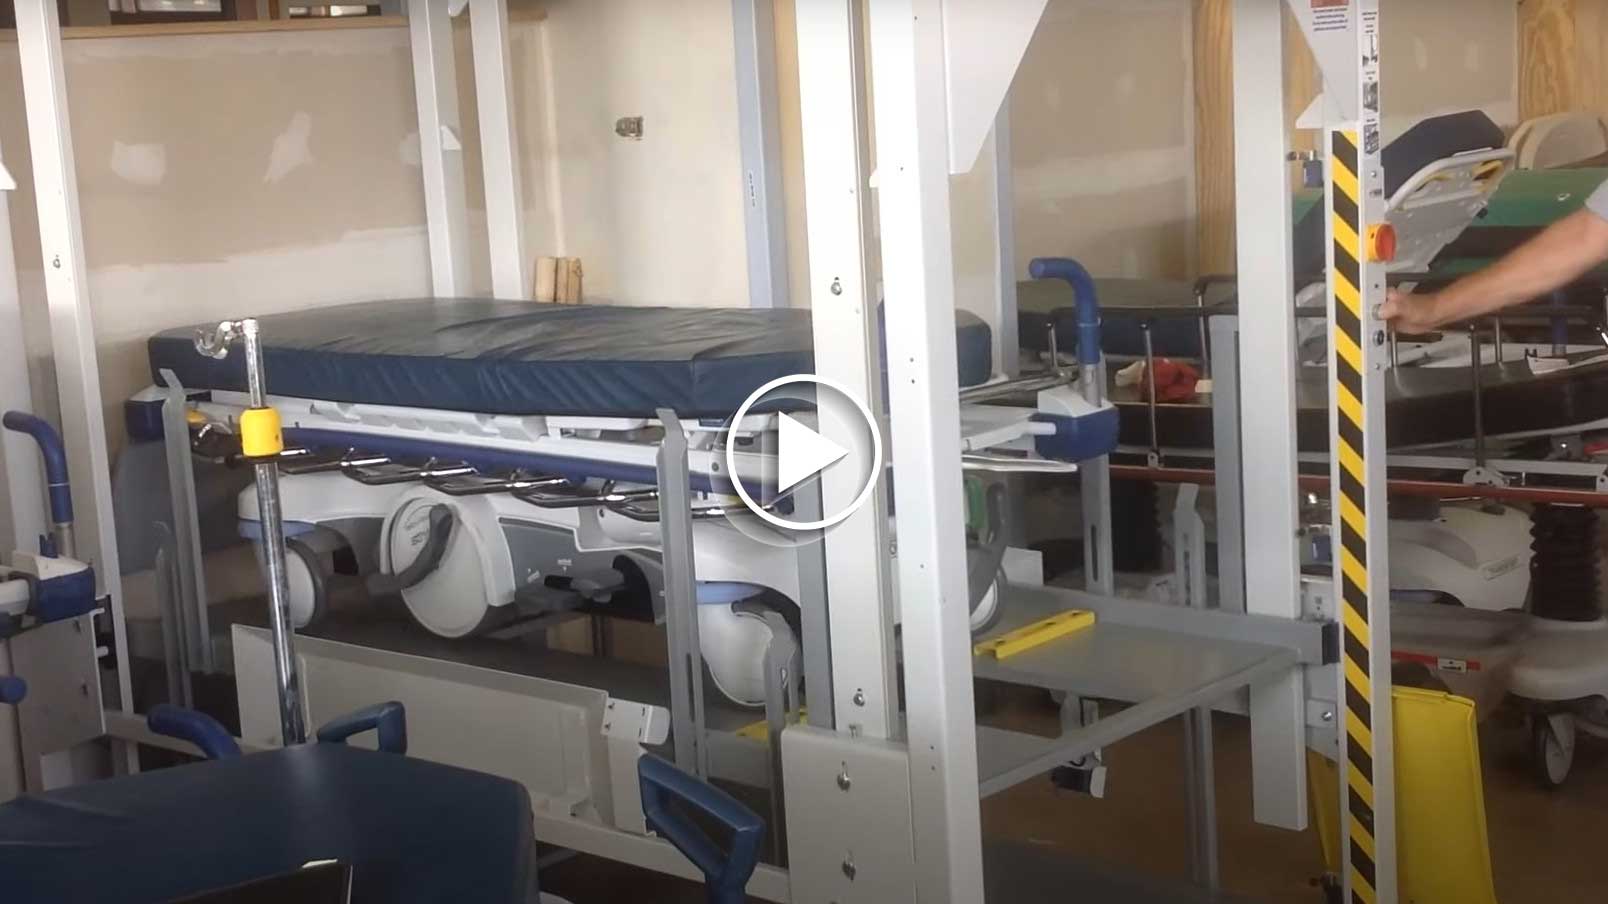 Video of Beds Being Loaded